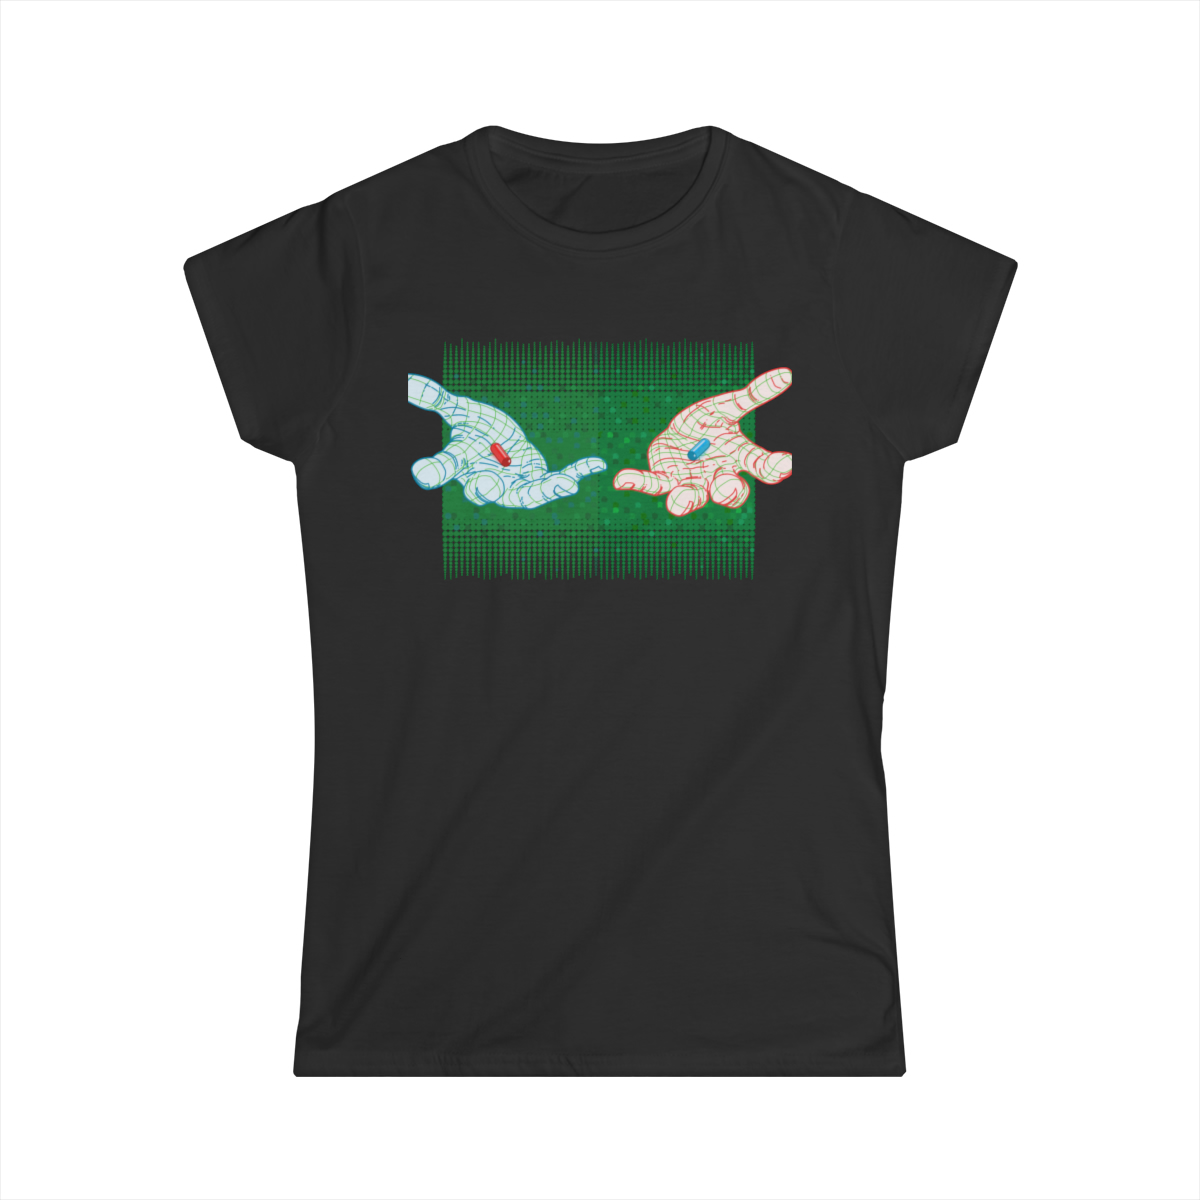 Two Hands (green) - Women's Softstyle Tee